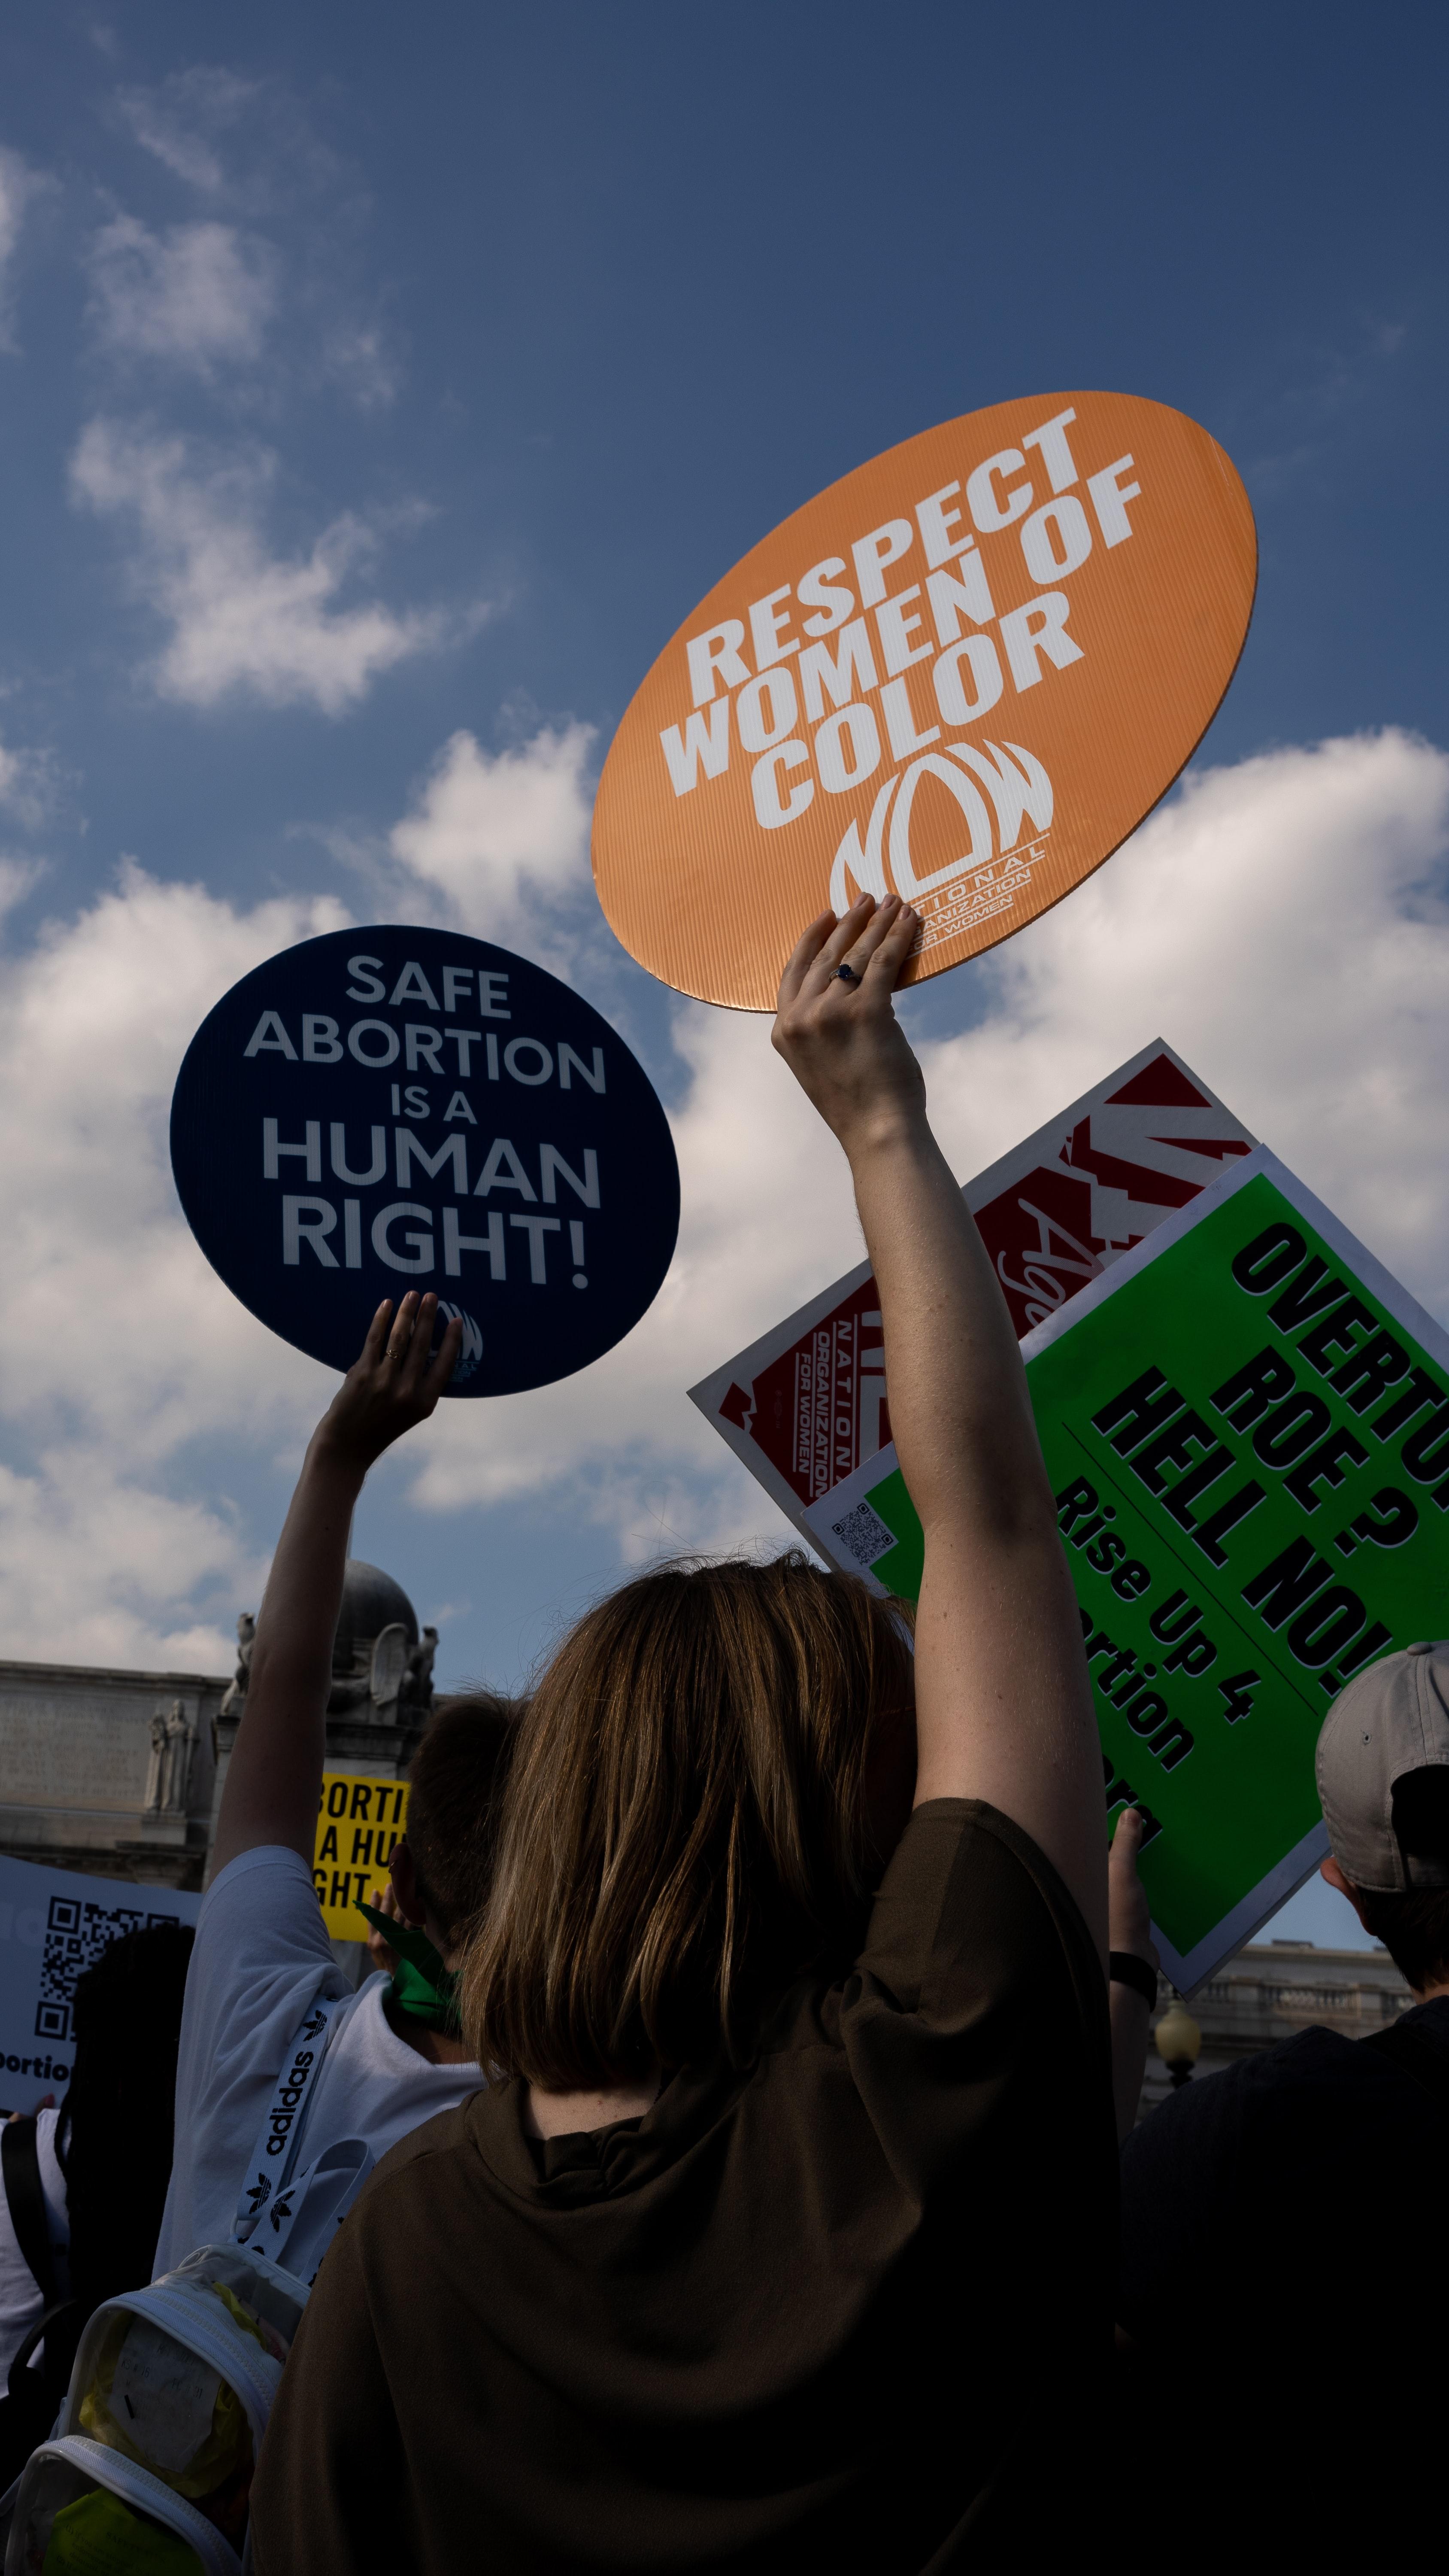 Image of a Roe v. Wade protest sign